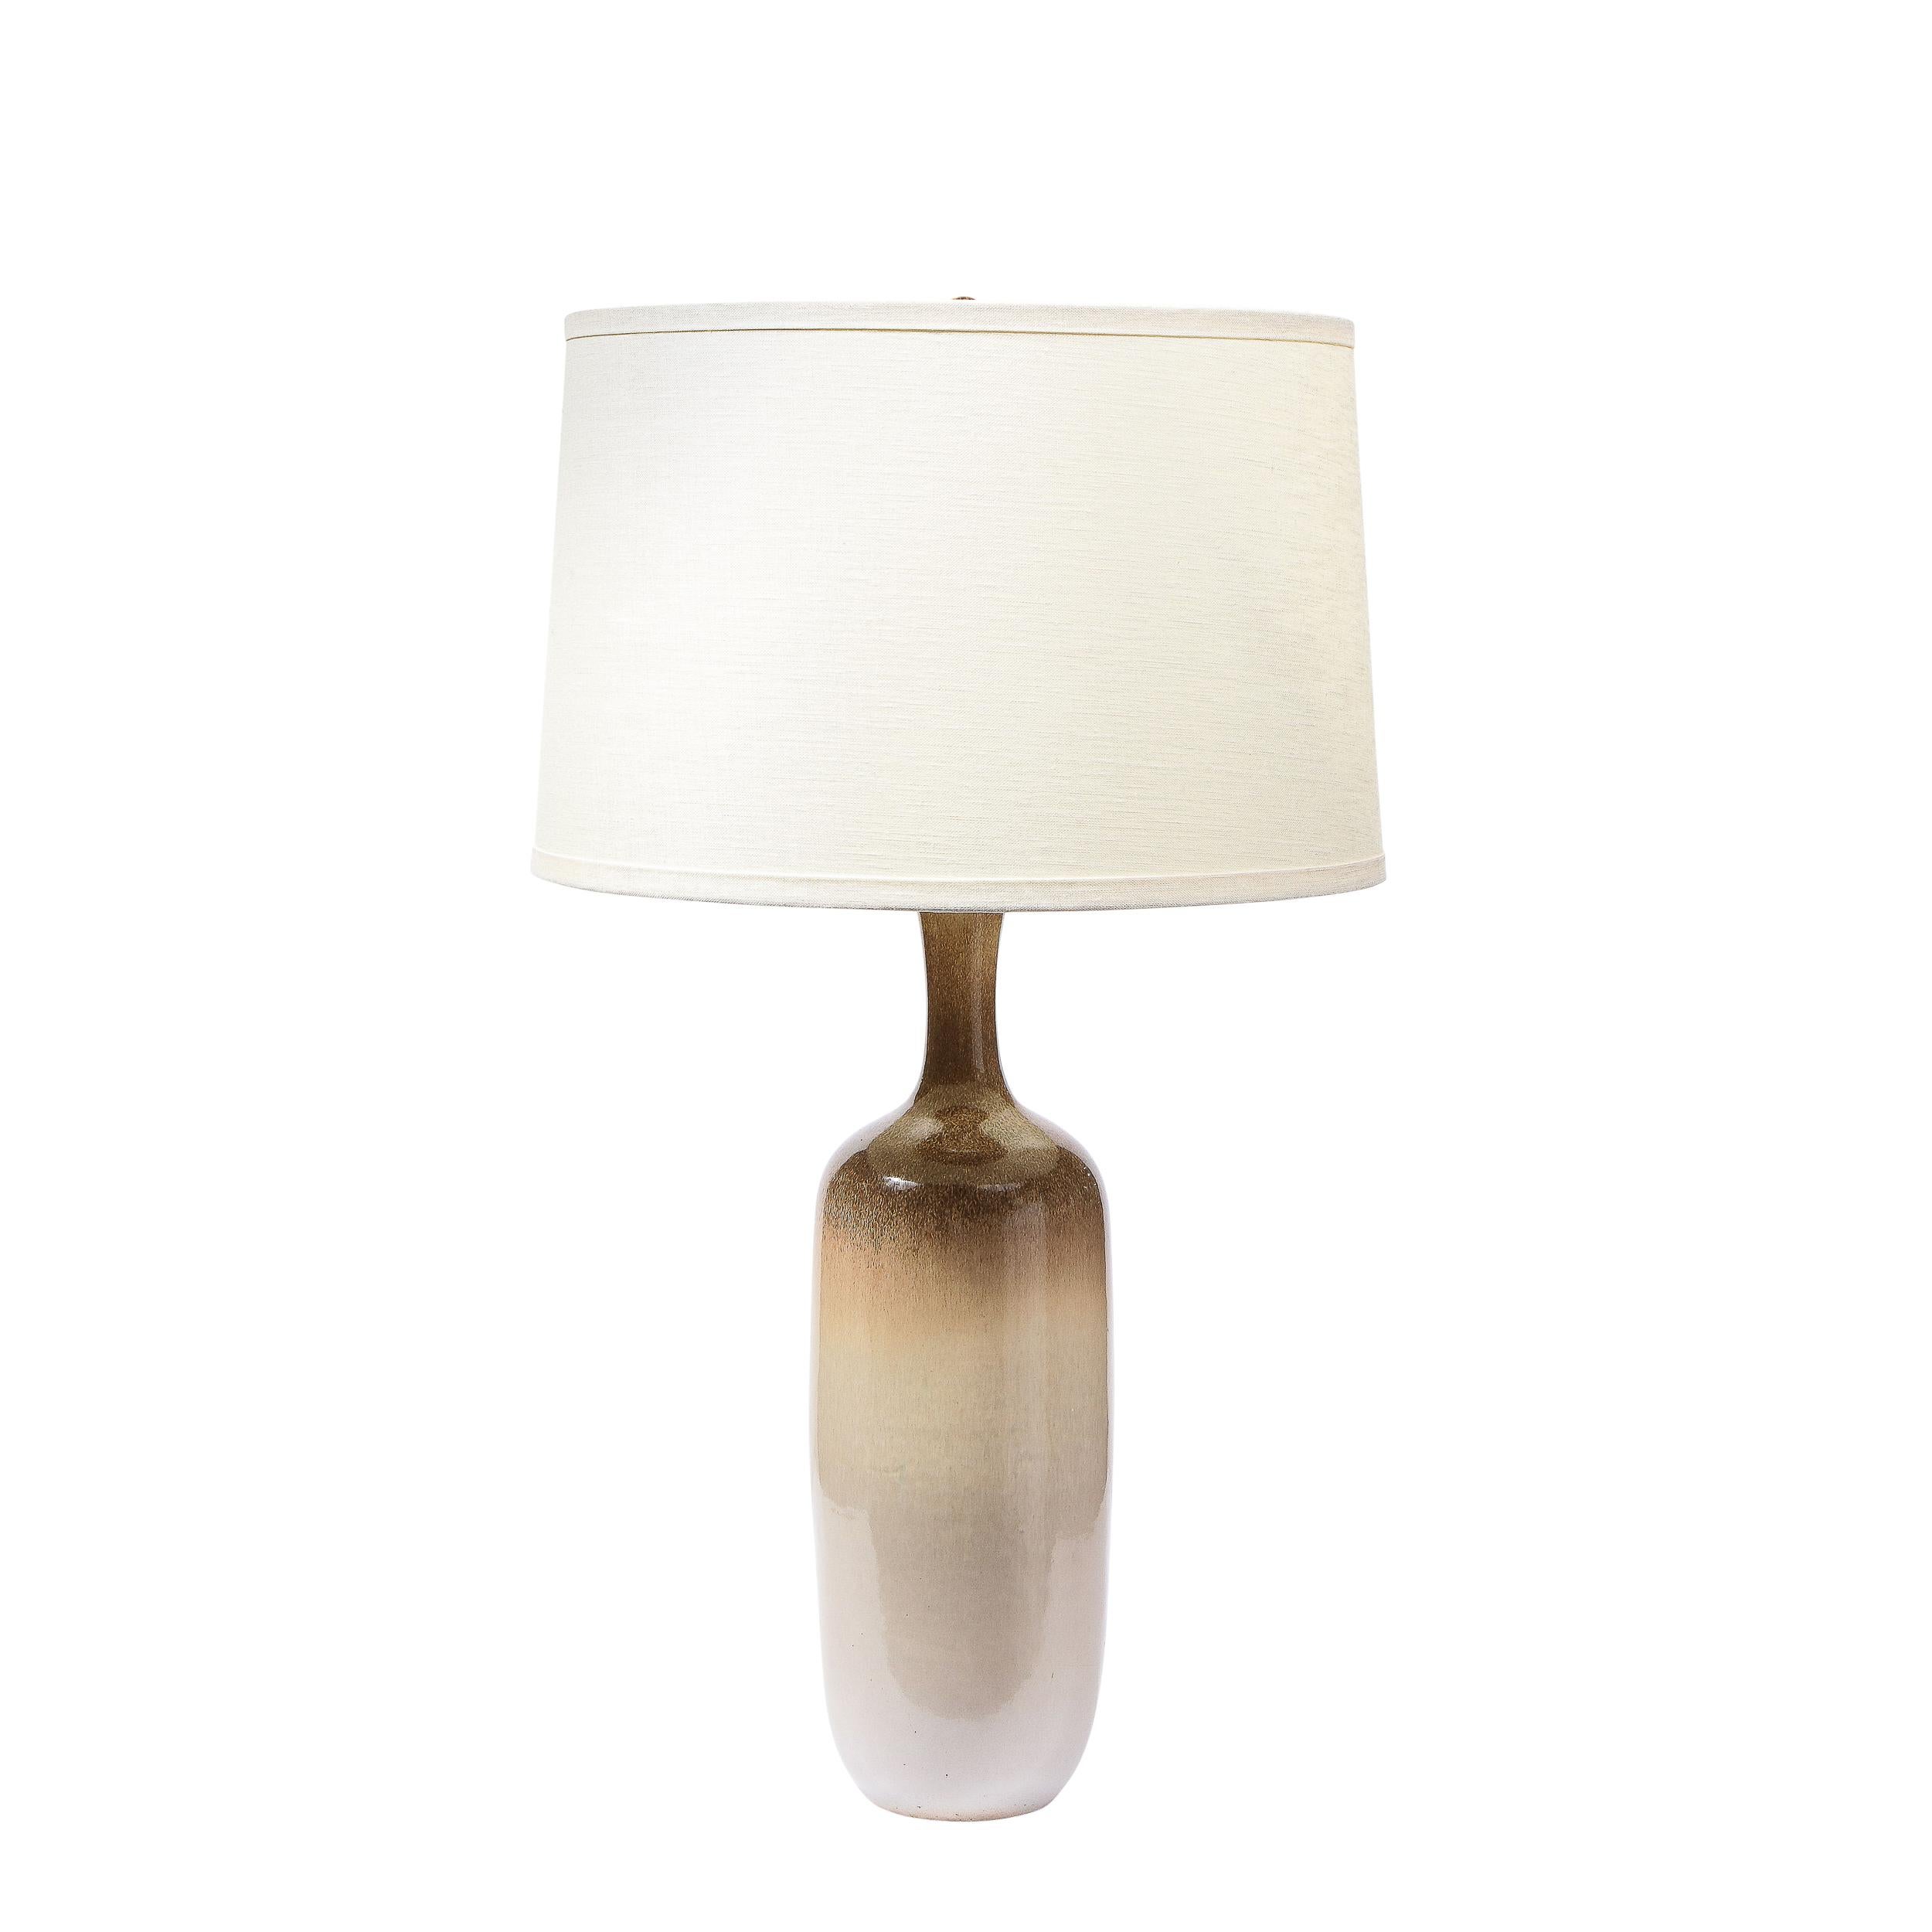 This refined and sophisticated pair of Mid Century Modern table lamps were realized by the esteemed maker Design Techniques in the United States circa 1970. The feature cylindrical bodies that taper slightly at their base and shoulders hand painted